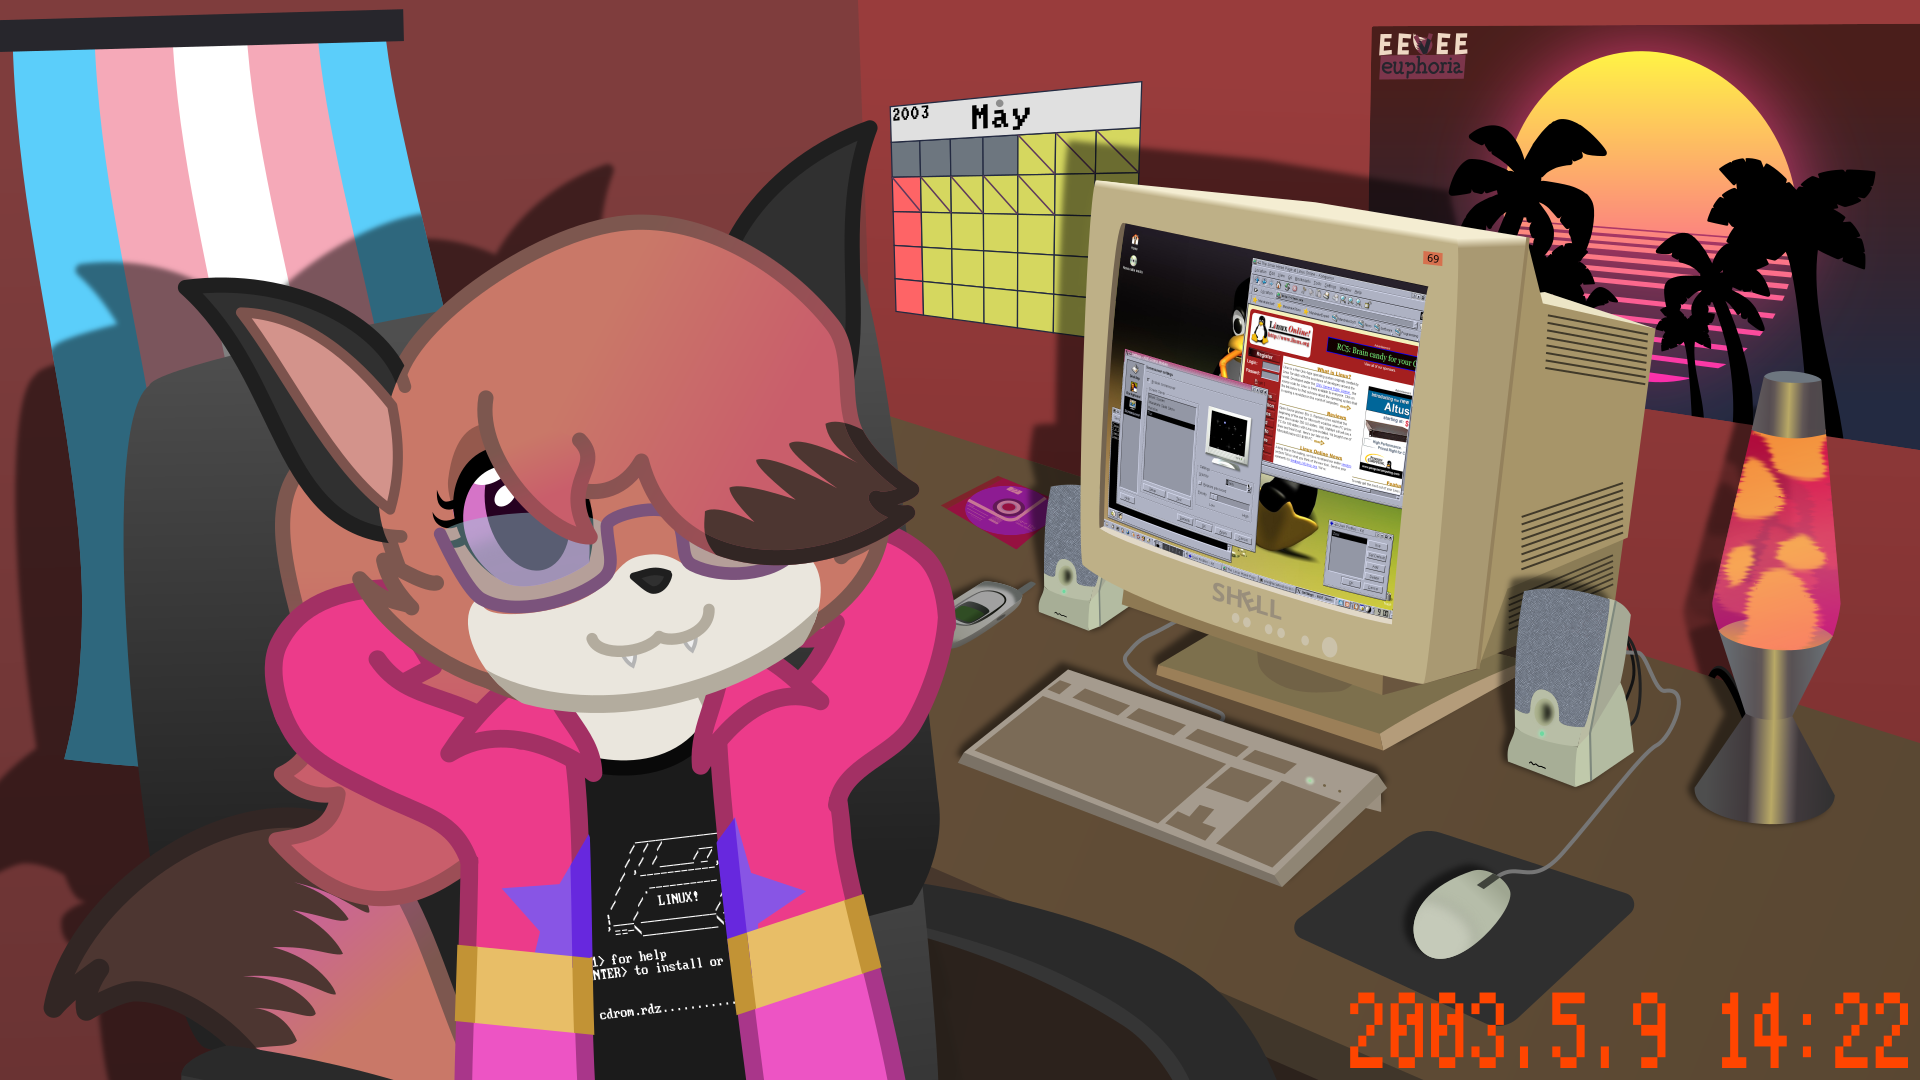 A fox with a ponytail for hair, sitting in front of a Linux computer, in a room filled with stuff typical of the early 2000's.